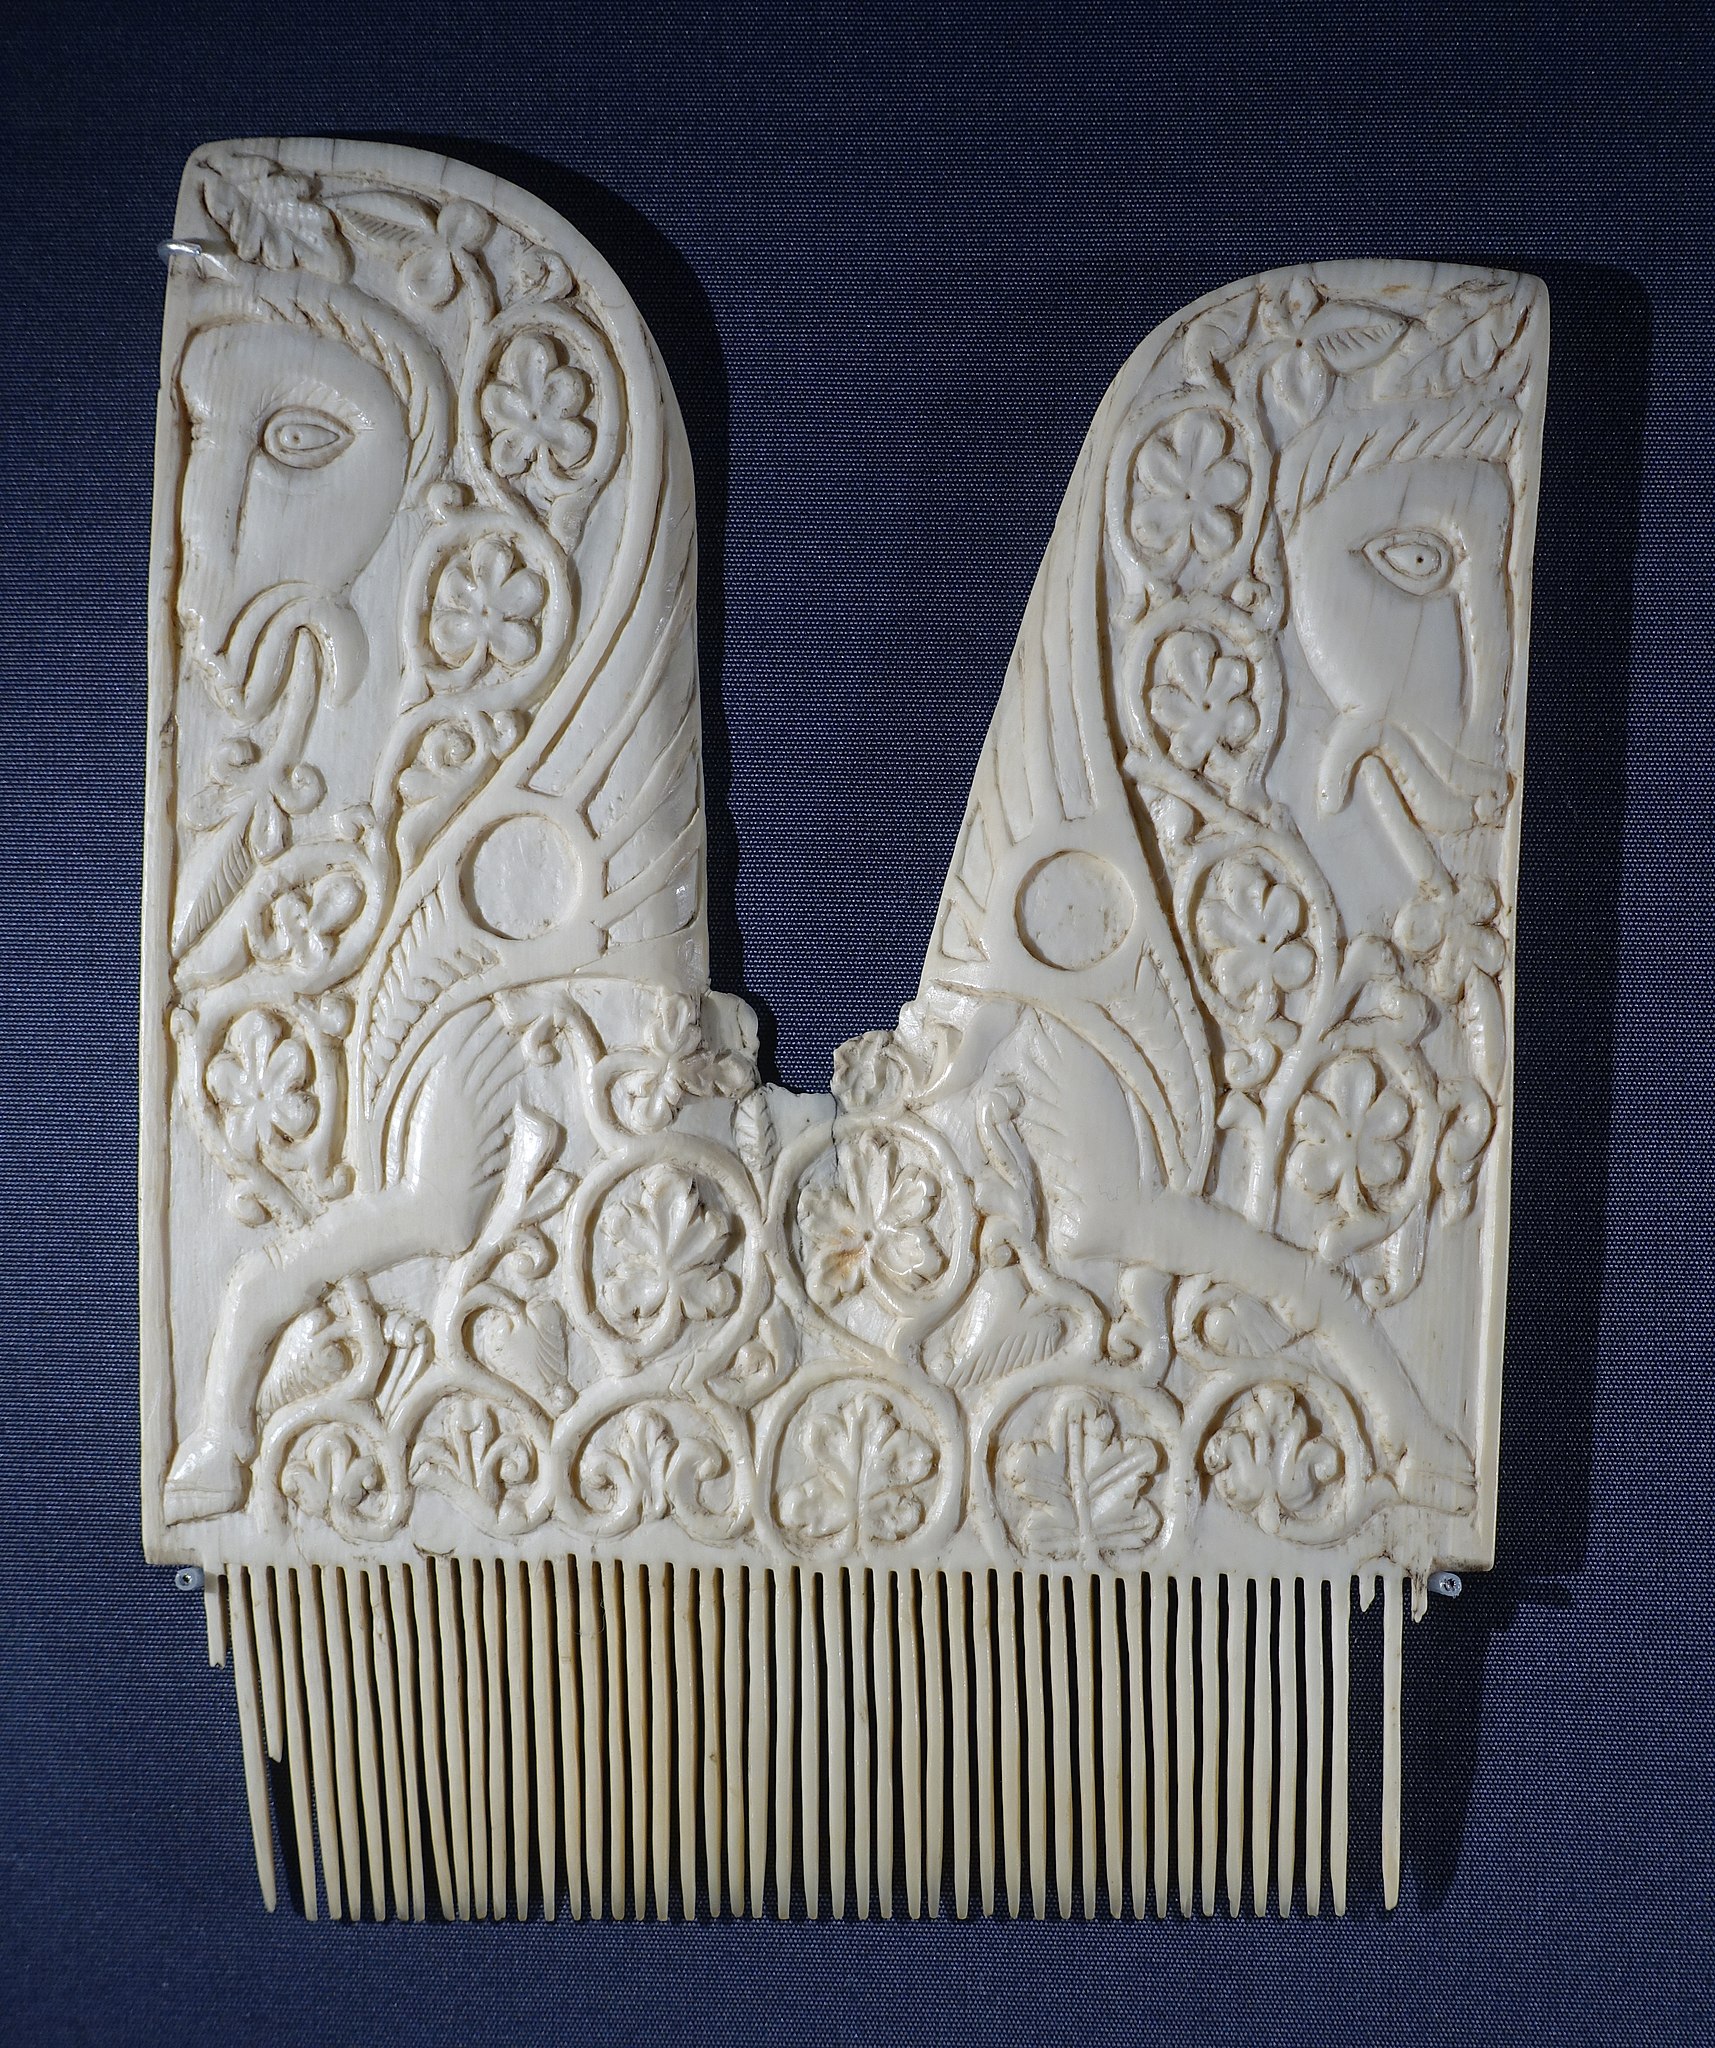 An ivory comb with a lyre-shaped handle carved with two winged horses in vines.